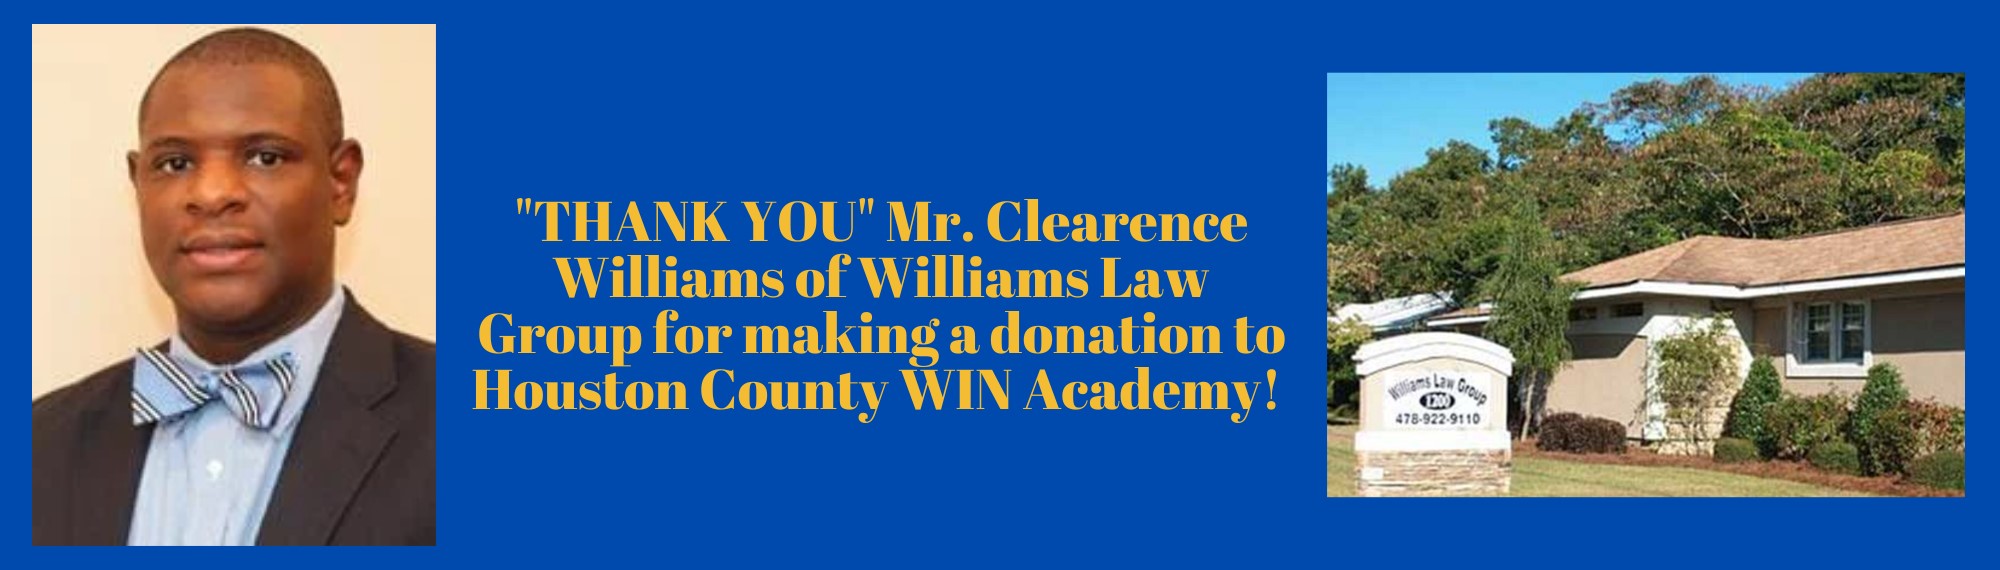 Law Firm Donation